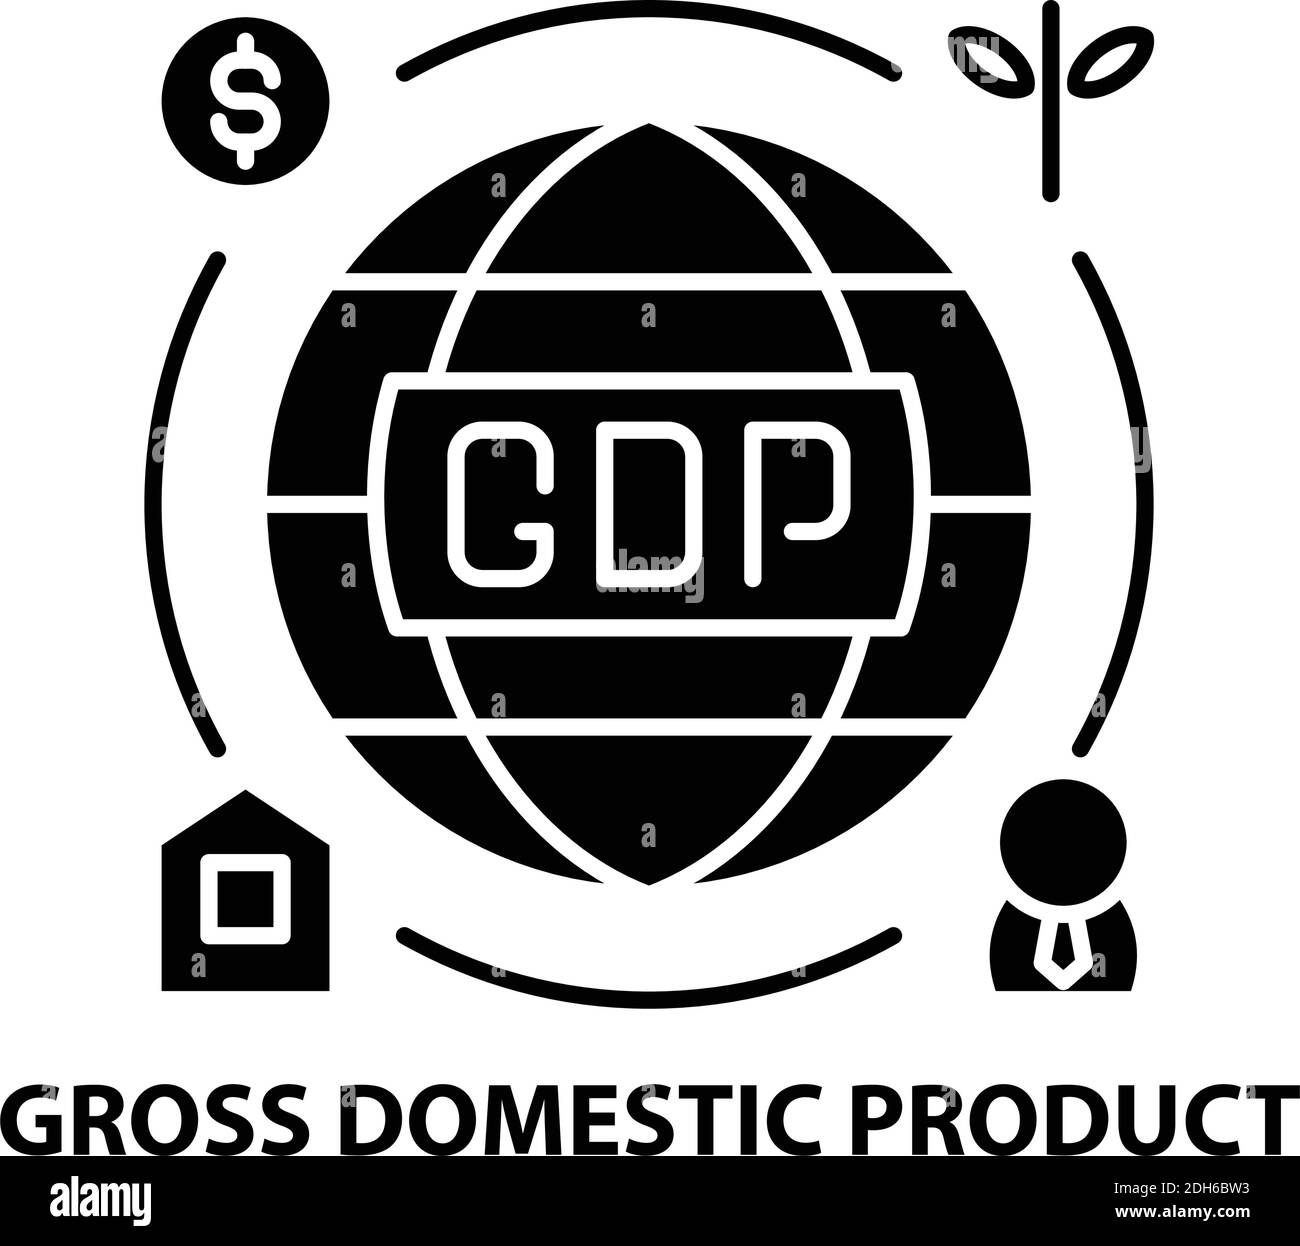 gross domestic product icon, black vector sign with editable strokes, concept illustration Stock Vector